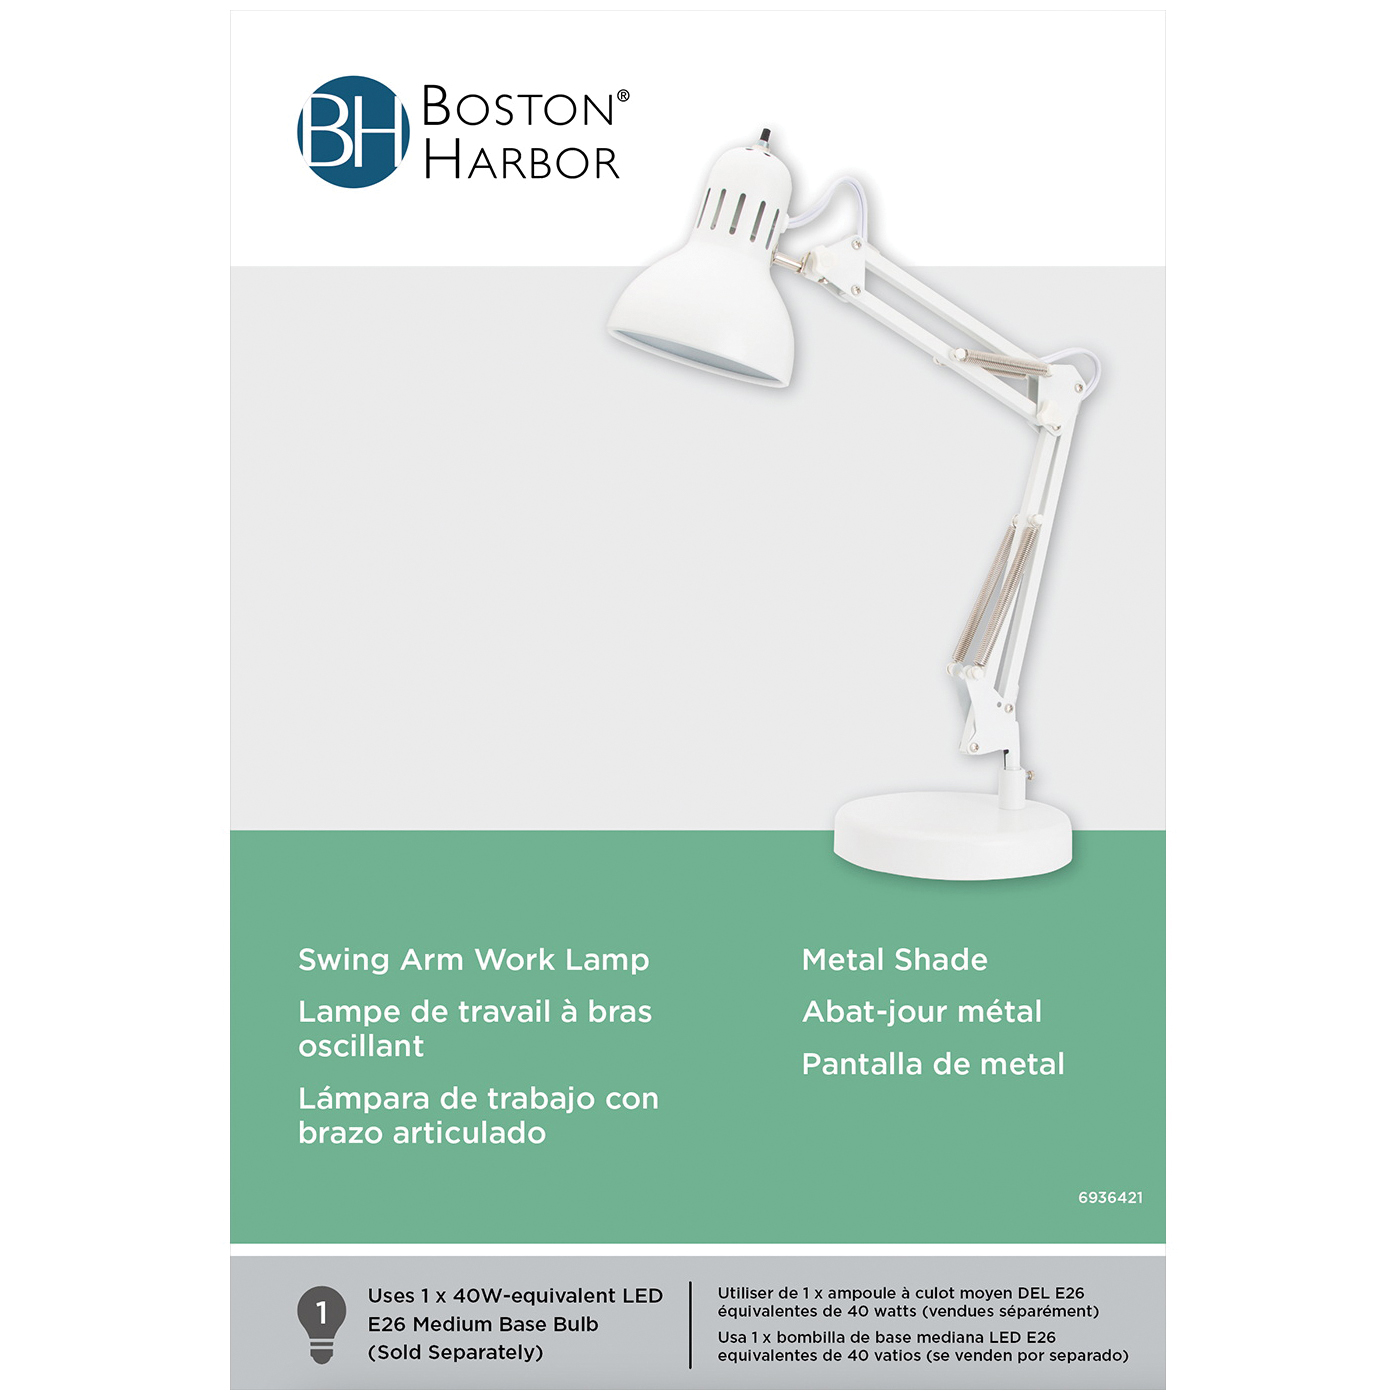 Boston Harbor TL-WK-134E-WH-3L Swing Arm Work Lamp, 120 V, 60 W, 1-Lamp, A19 or CFL Lamp, White - 2